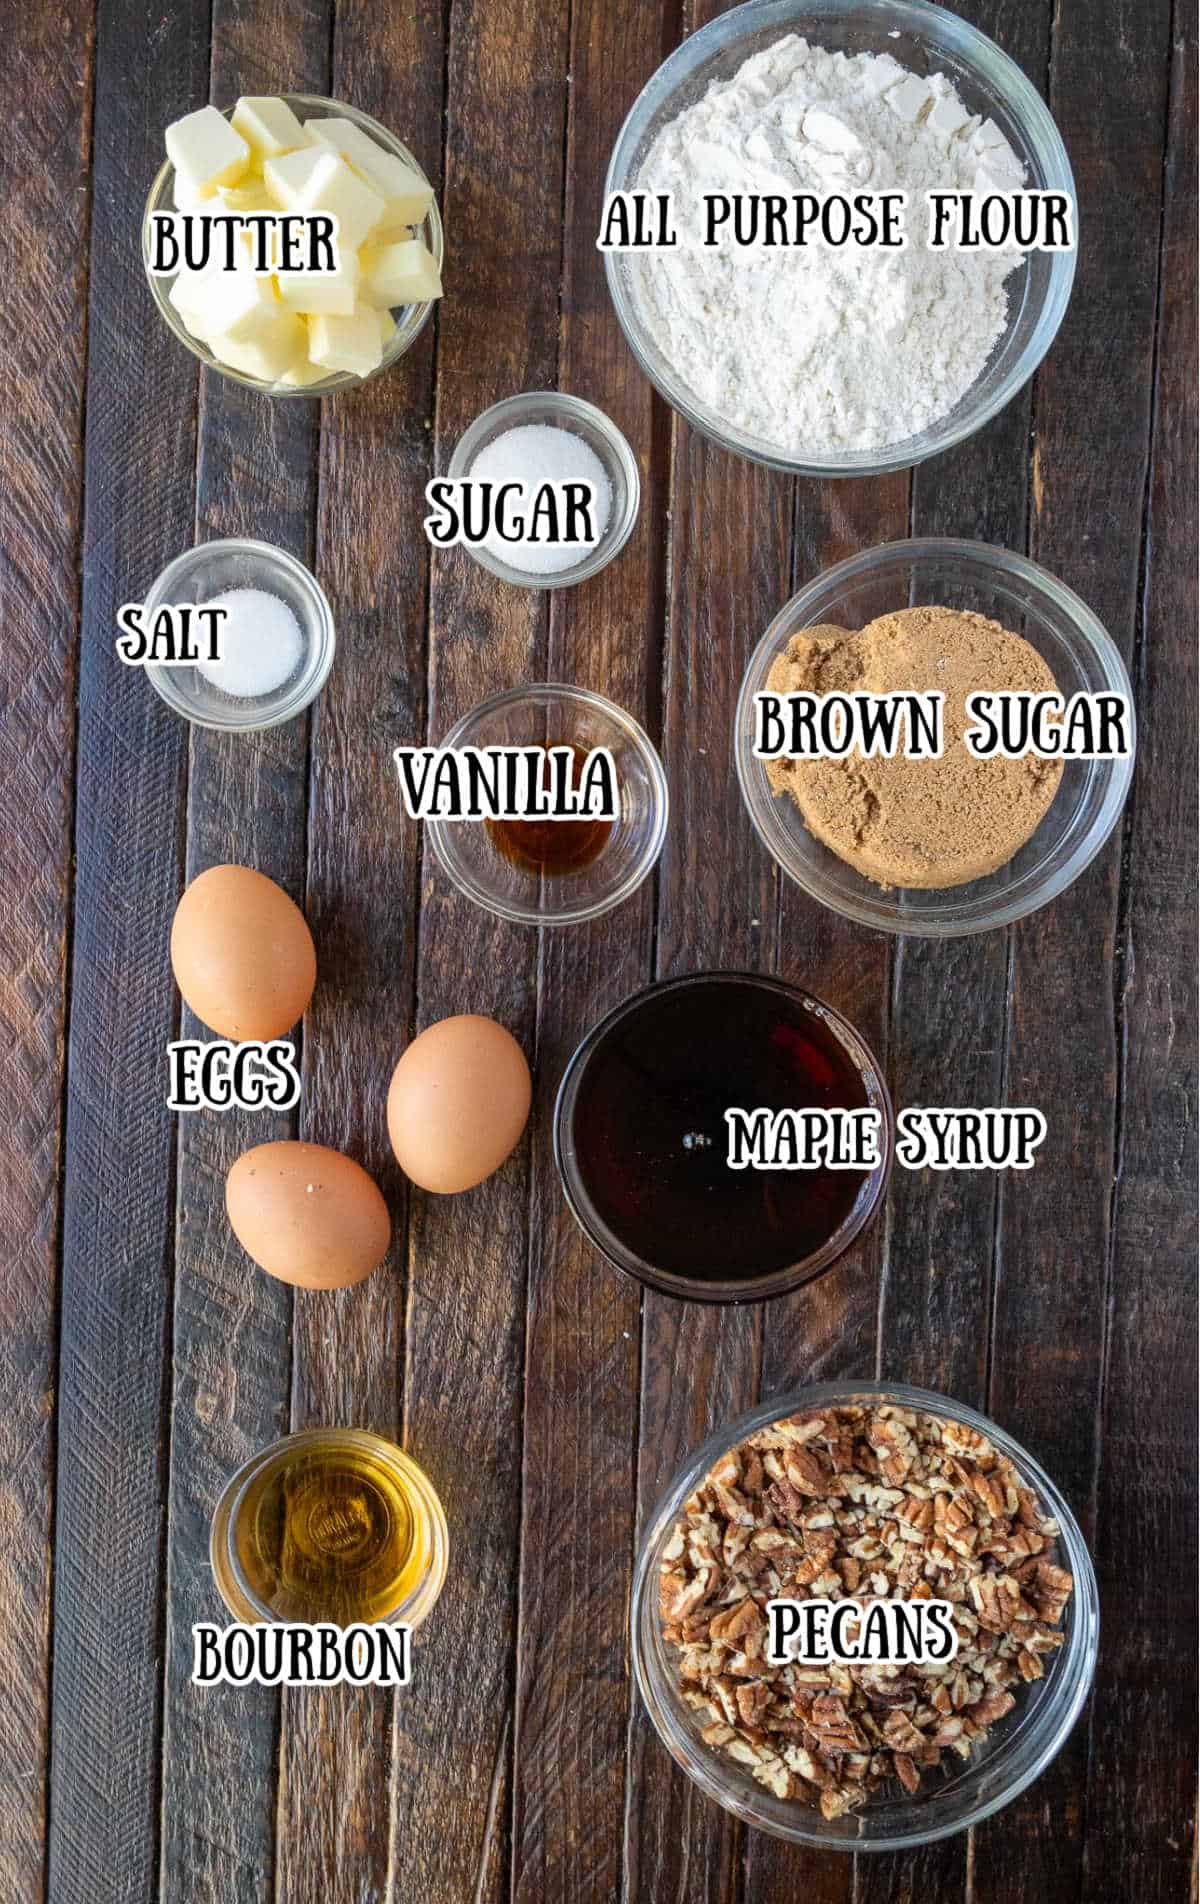 All the ingredients needed for this pecan pie.